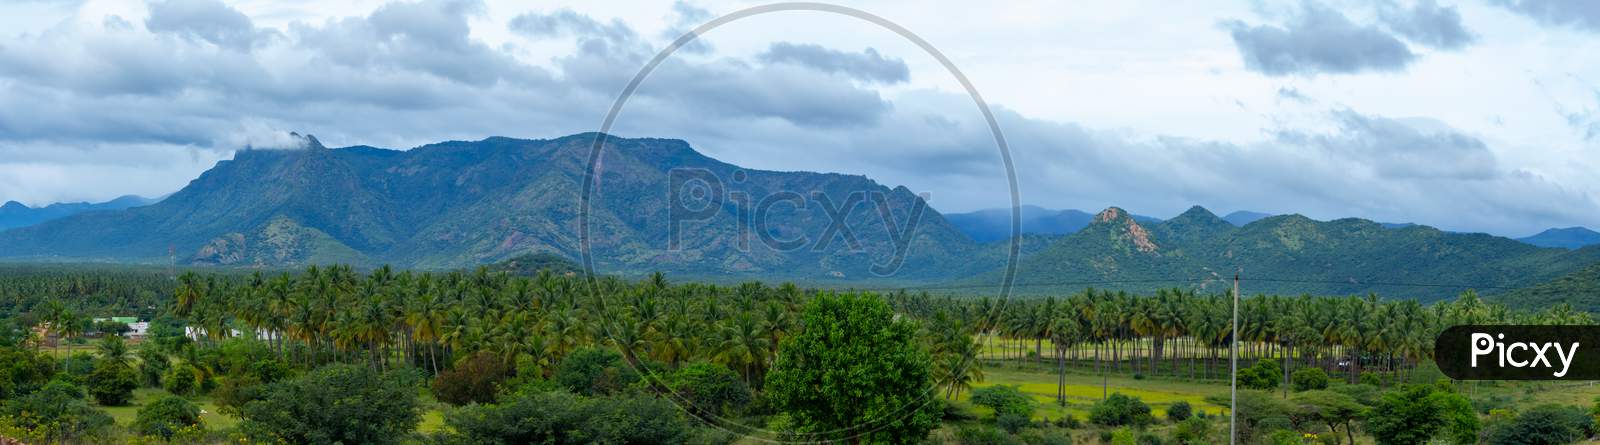 Hills And Farmlands Of South India - Tamilnadu - Panorama Landscape . Beautiful Farmlands - A View From The Hills Of Theni District, South India. Panorama Stock Images.